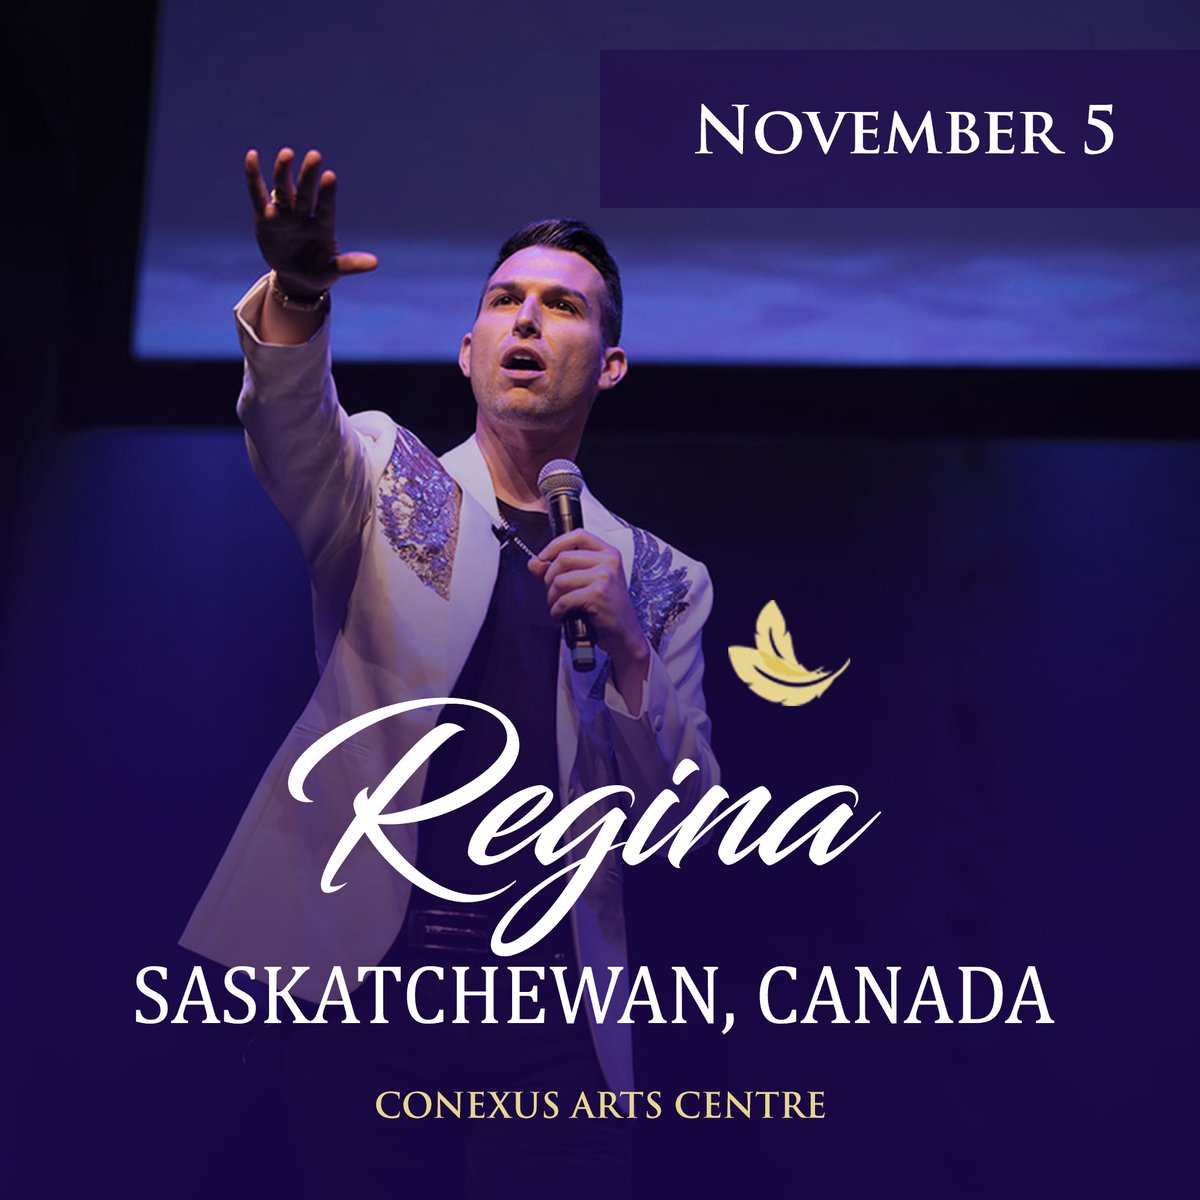 🇨🇦 The wait is over, Regina! Join Matt Fraser, America's Top Psychic Medium, at Conexus Arts Centre on November 5th for an night of psychic readings. Don’t miss out, purchase your tickets at MeetMattFraser.com